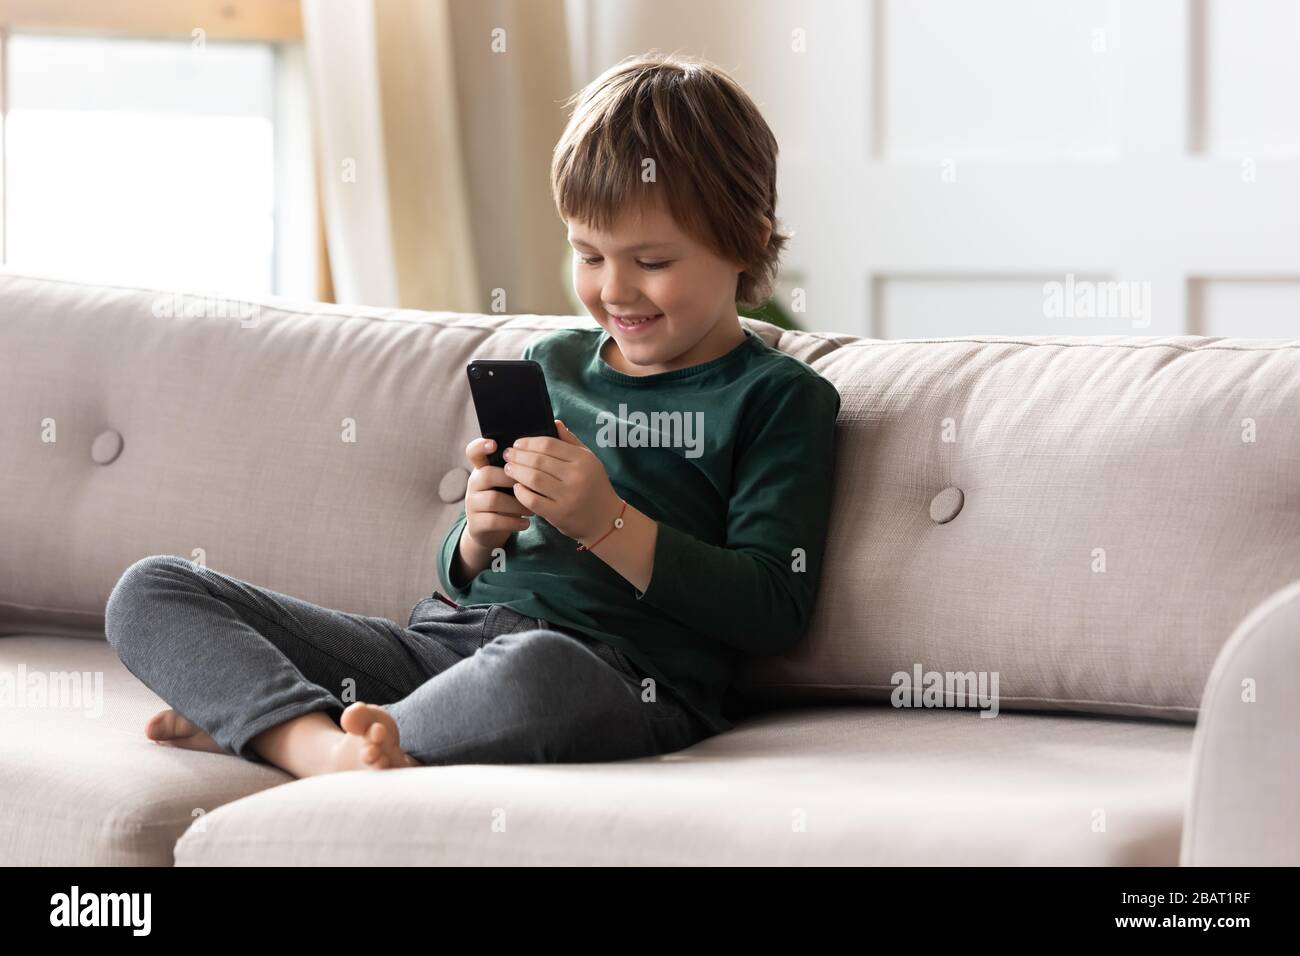 Smiling little preschool child boy playing online game. Stock Photo